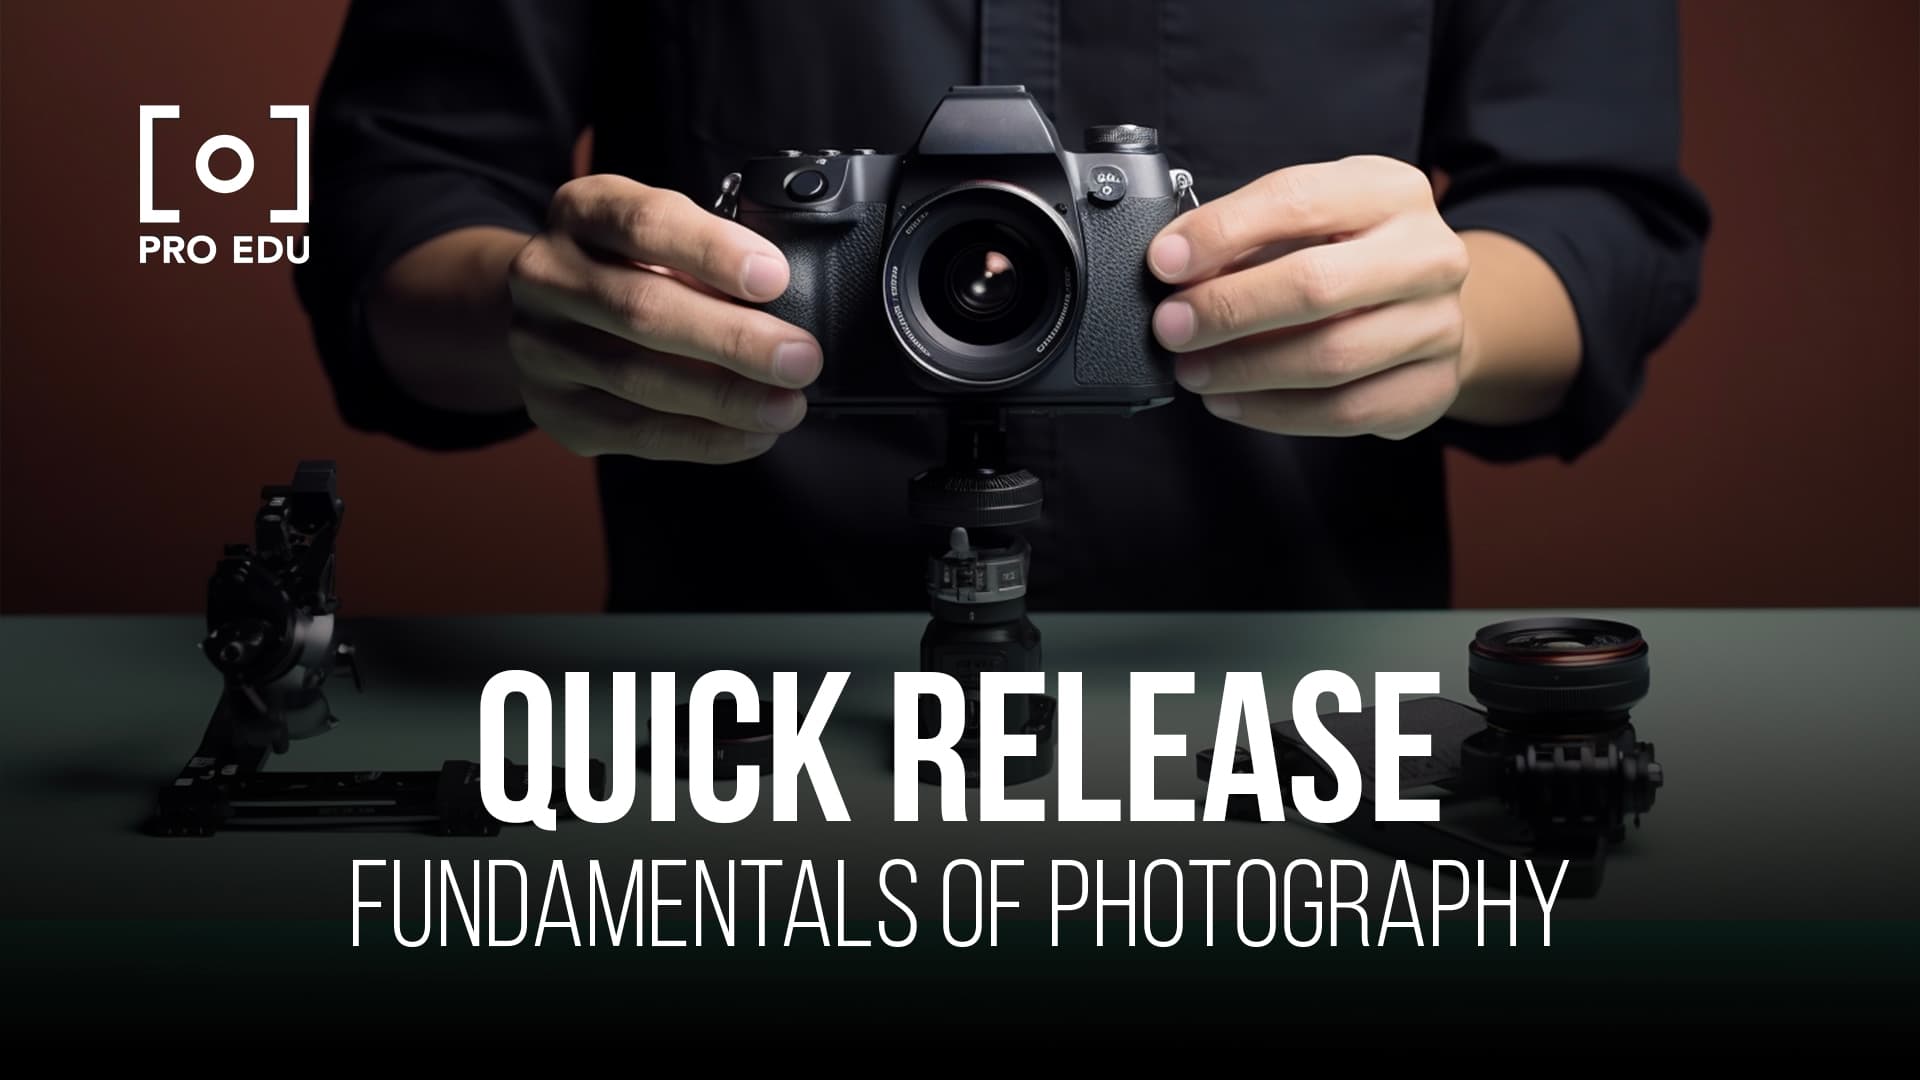 Enhancing your photography workflow with quick release systems